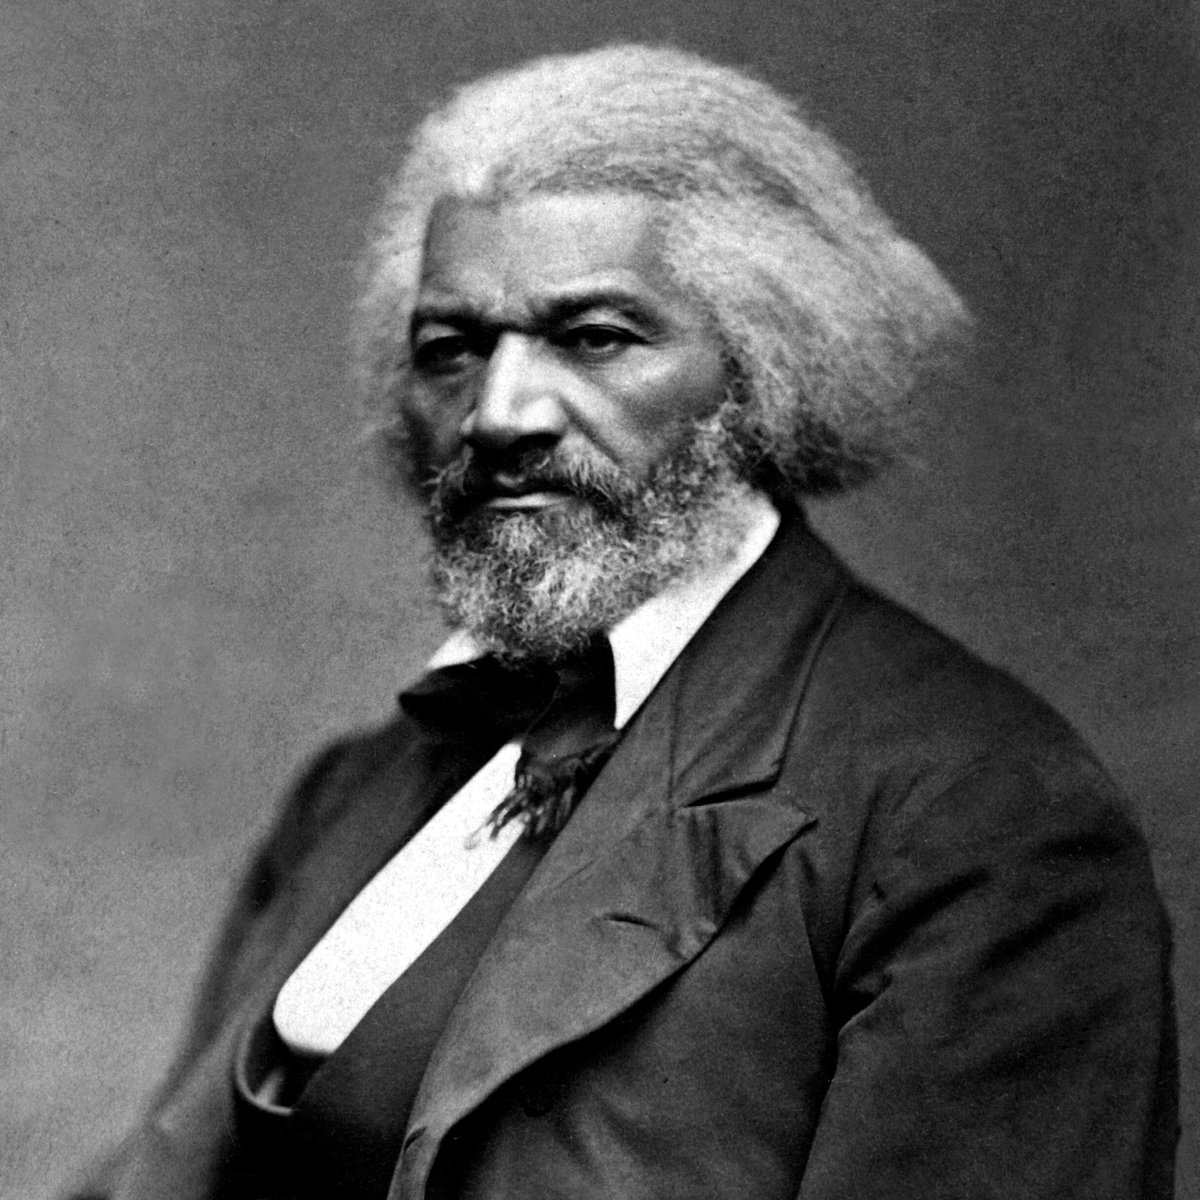 Born into slavery in Maryland in 1818, Frederick Douglass never knew his birthday. Remembering his mother once called him 'Little Valentine,' he later chose to celebrate his birth on Valentine's Day. February was chosen as #BlackHistoryMonth in part to honor Douglass & Lincoln.